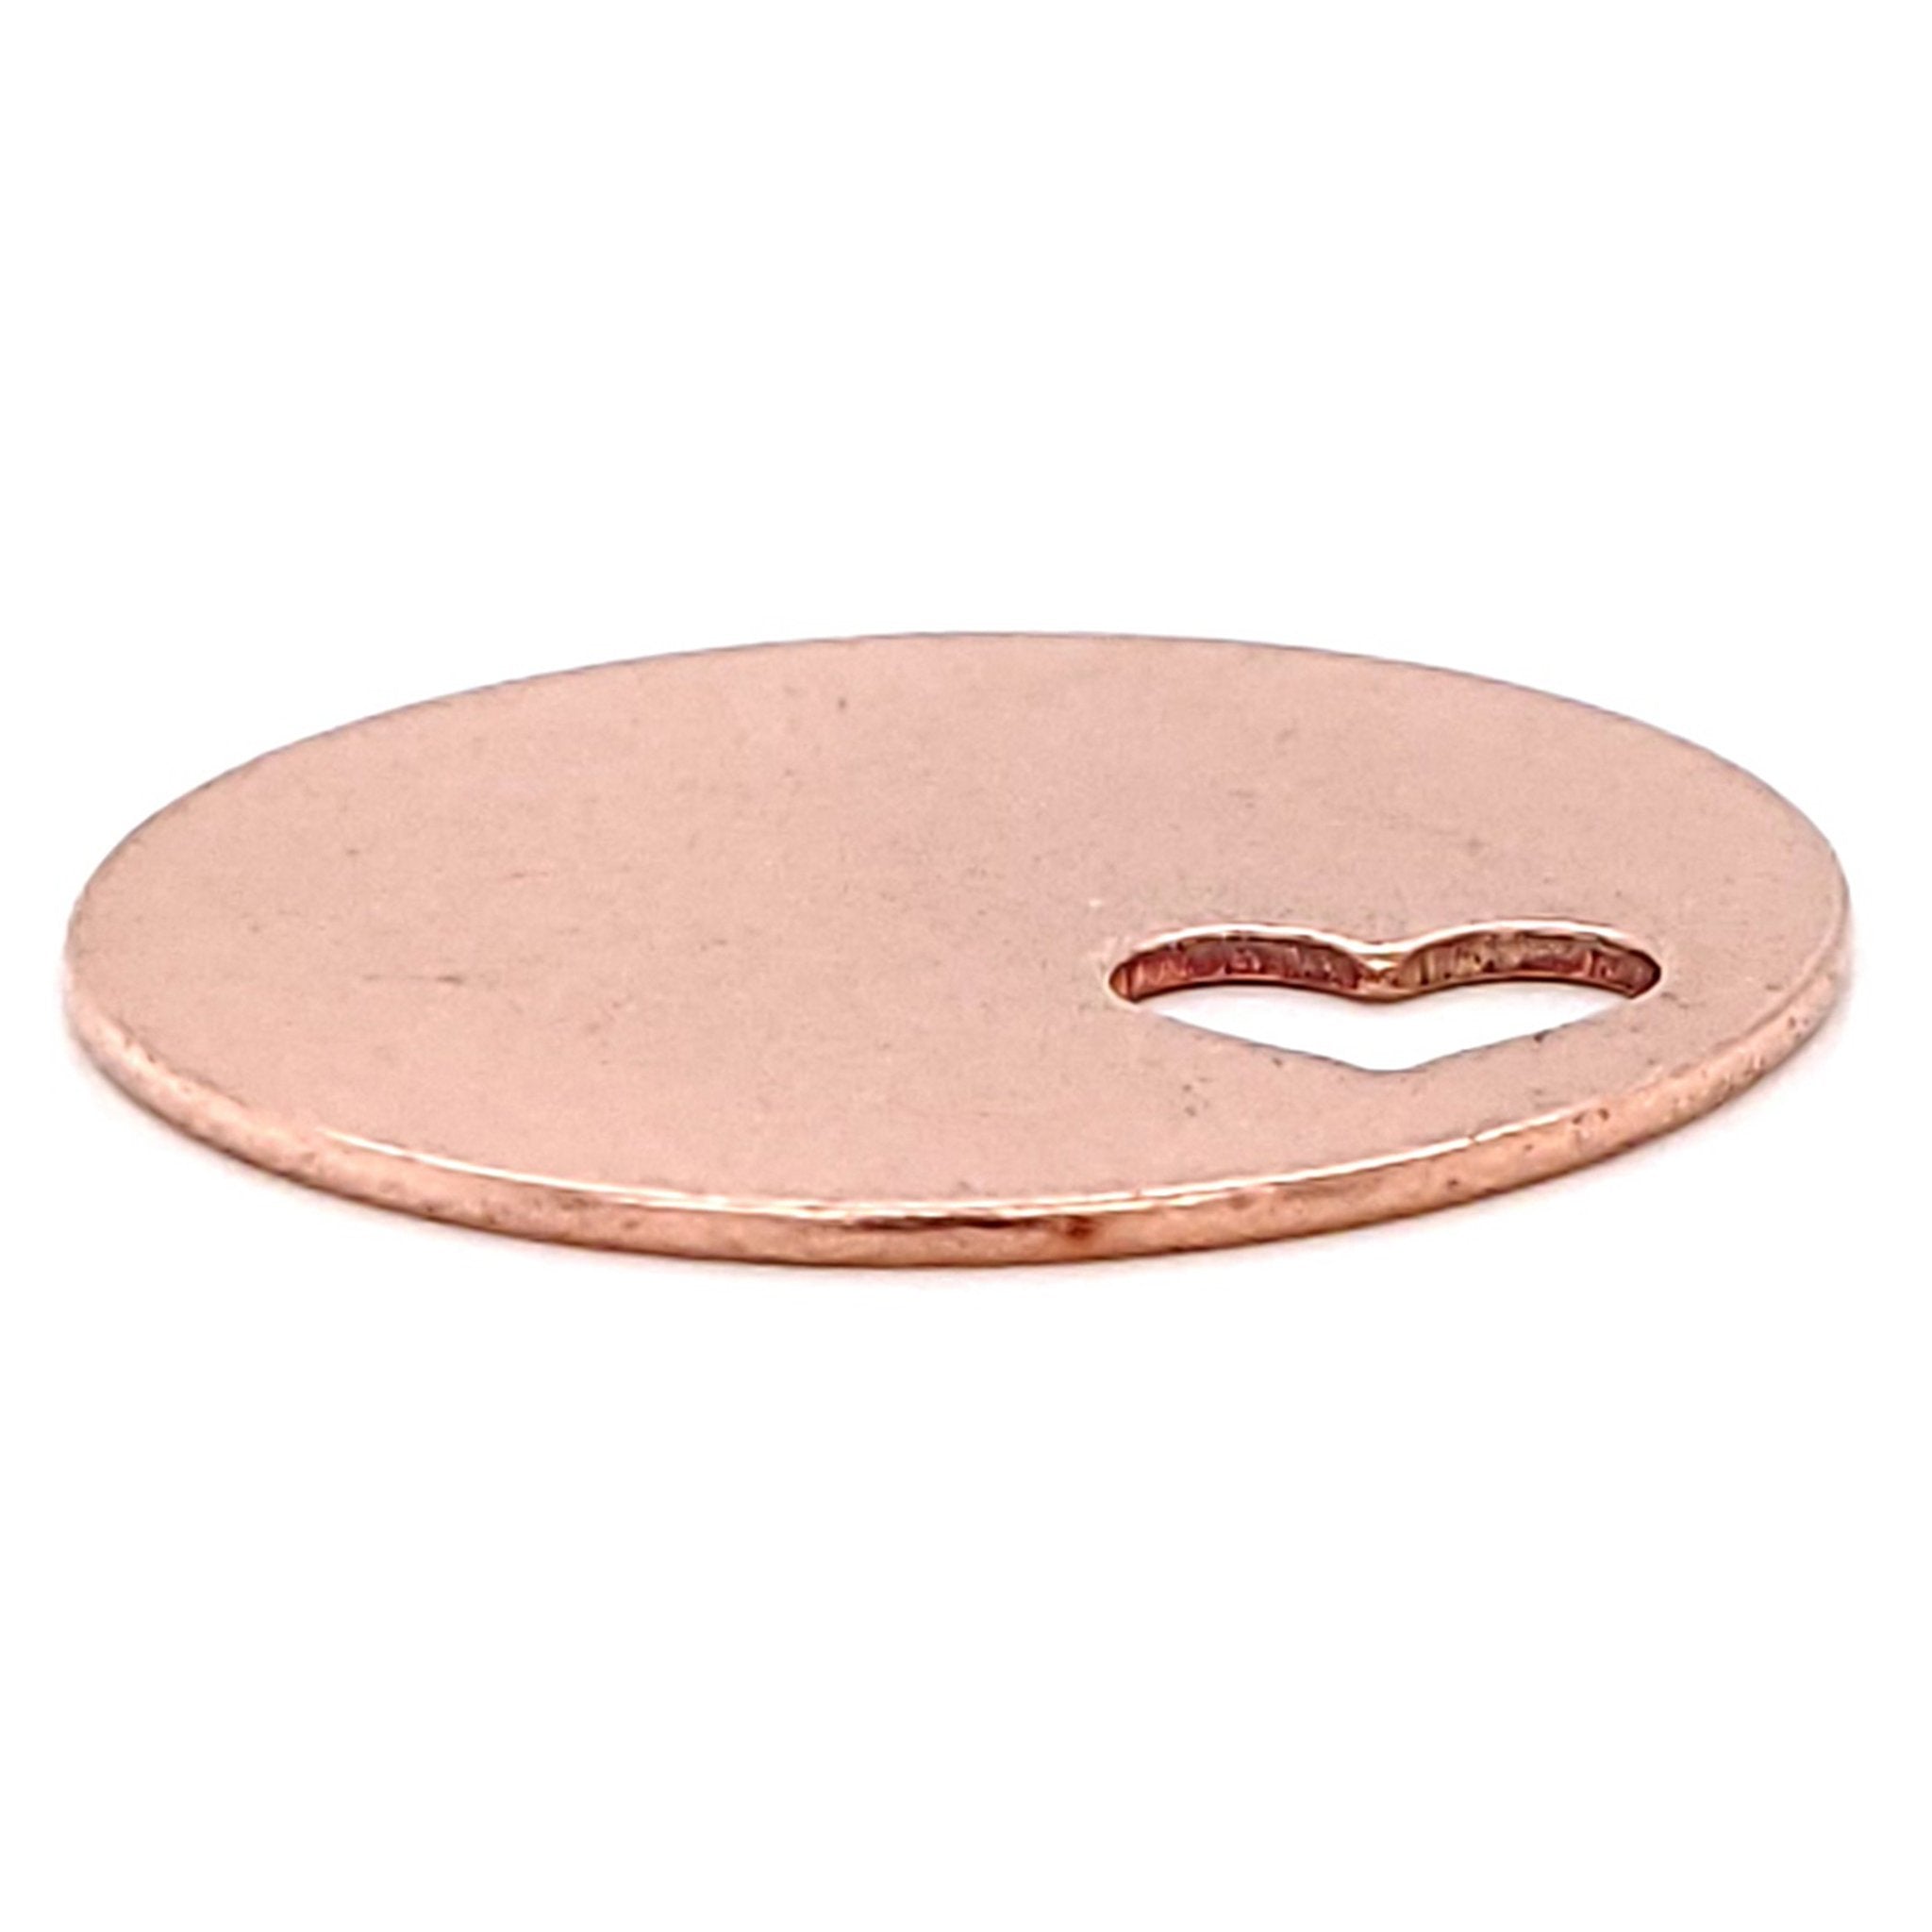 Copper blank round heart cutout pendant at an angle.